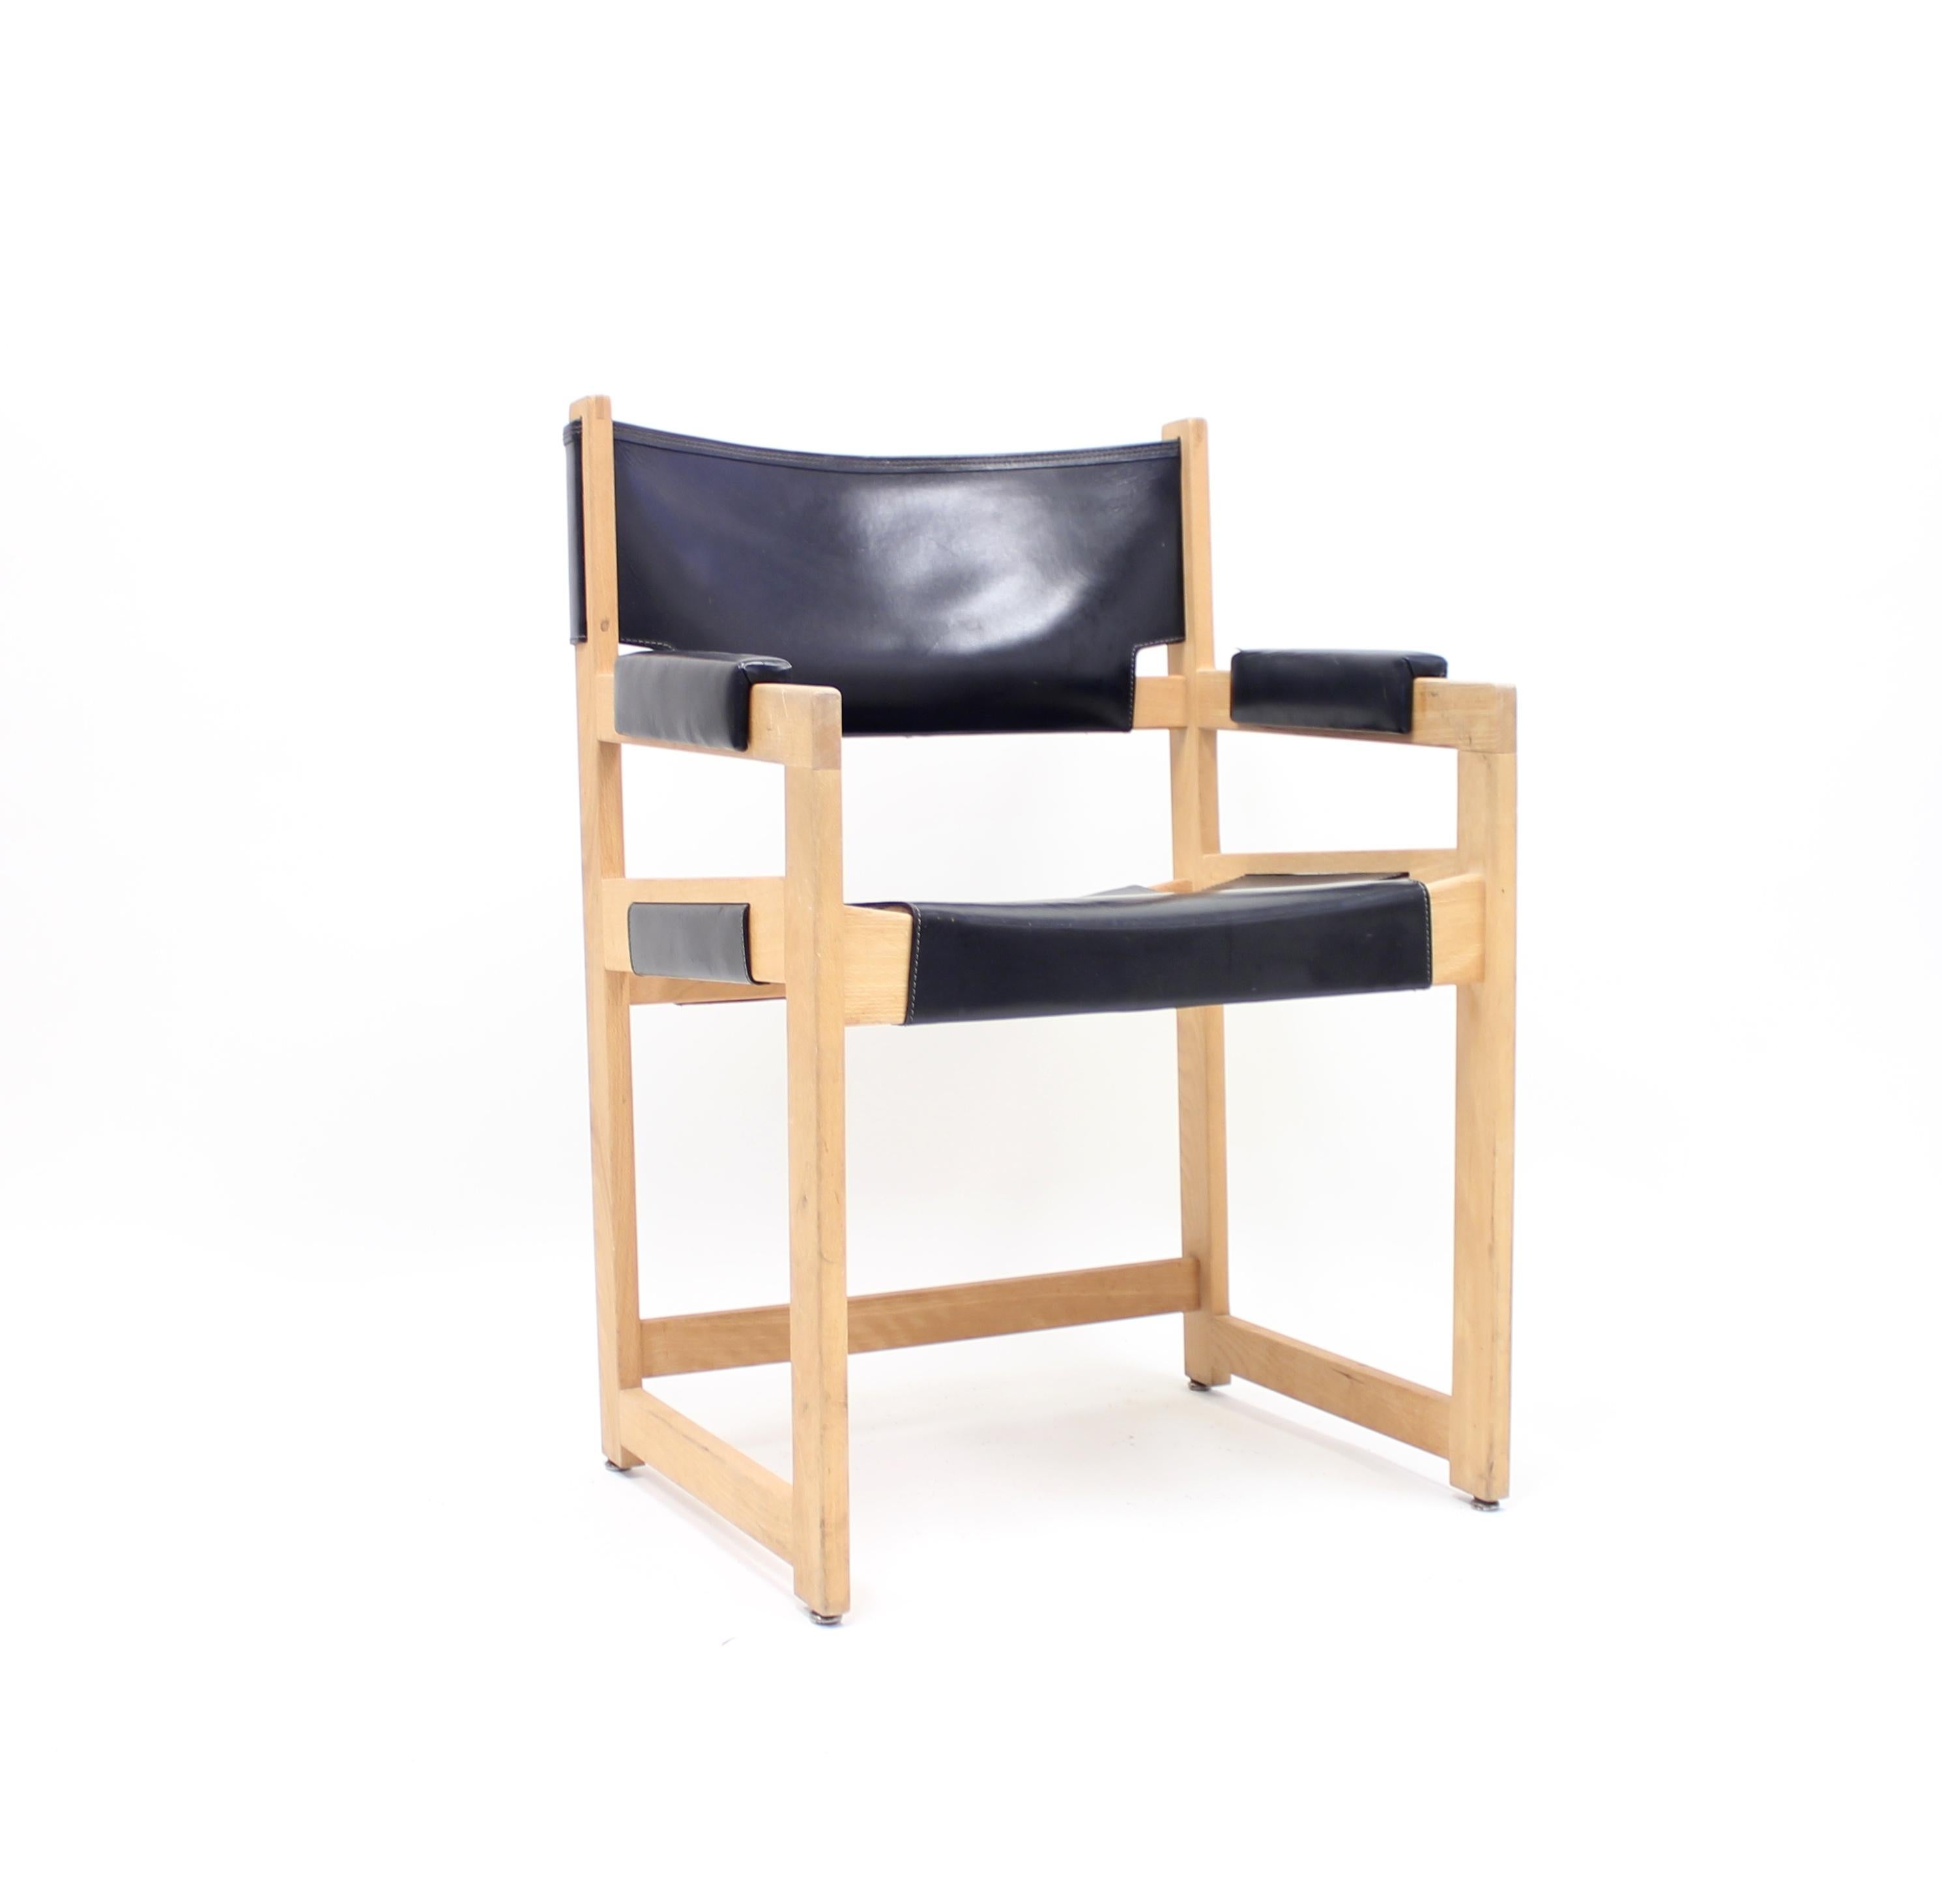 Armchair designed by Sven Kai Larsen for Swedish manufacturer Nordiska Kompaniet in the 1960s. It´s made of solid pine and black leather. This version is a bit more unusual because of the different type of armrests. Good vintage condition with light